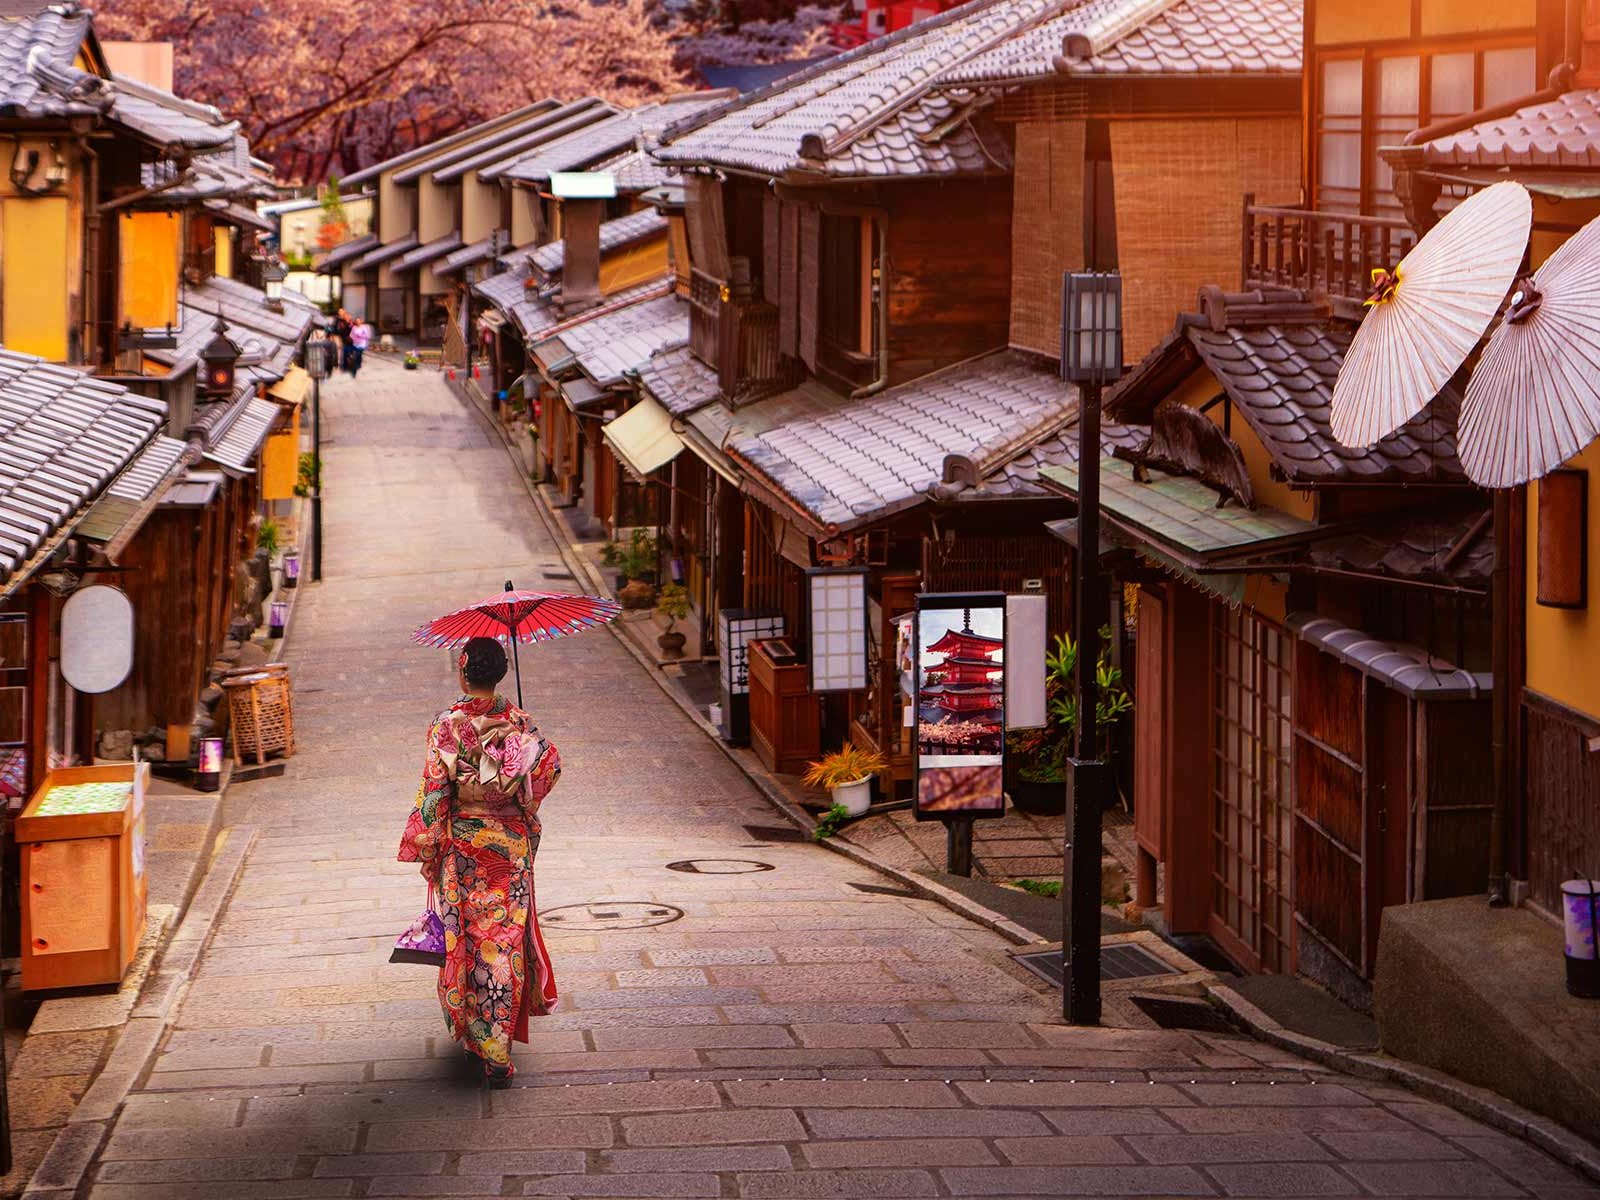 The most beautiful street is said to be in Japan ...